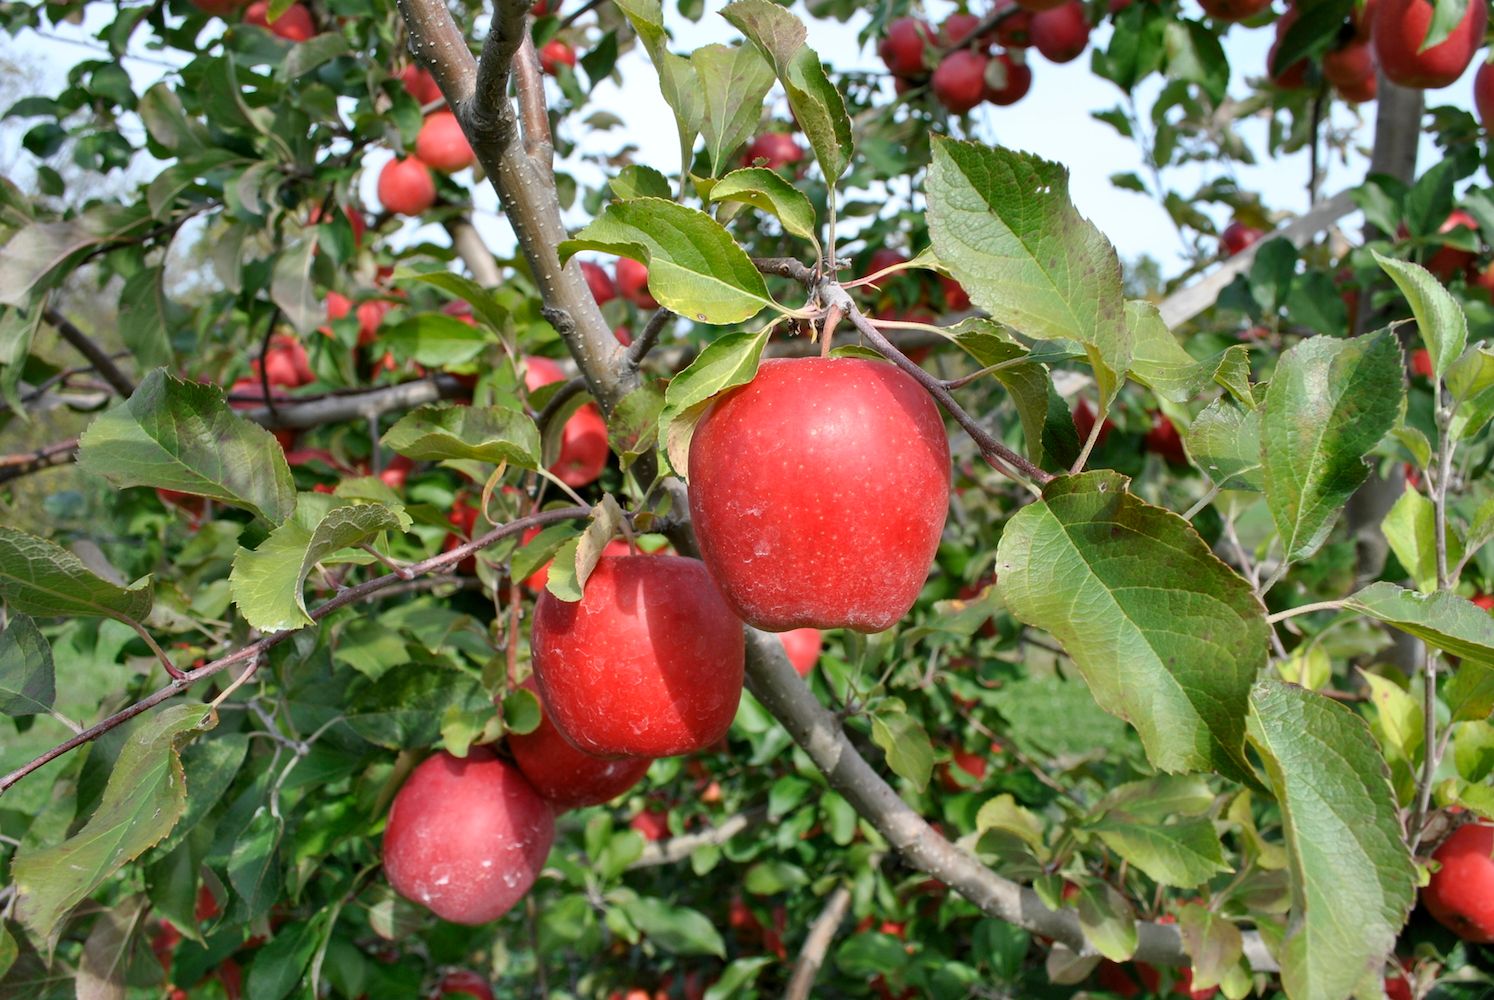 Growing supply of Envy apples annually